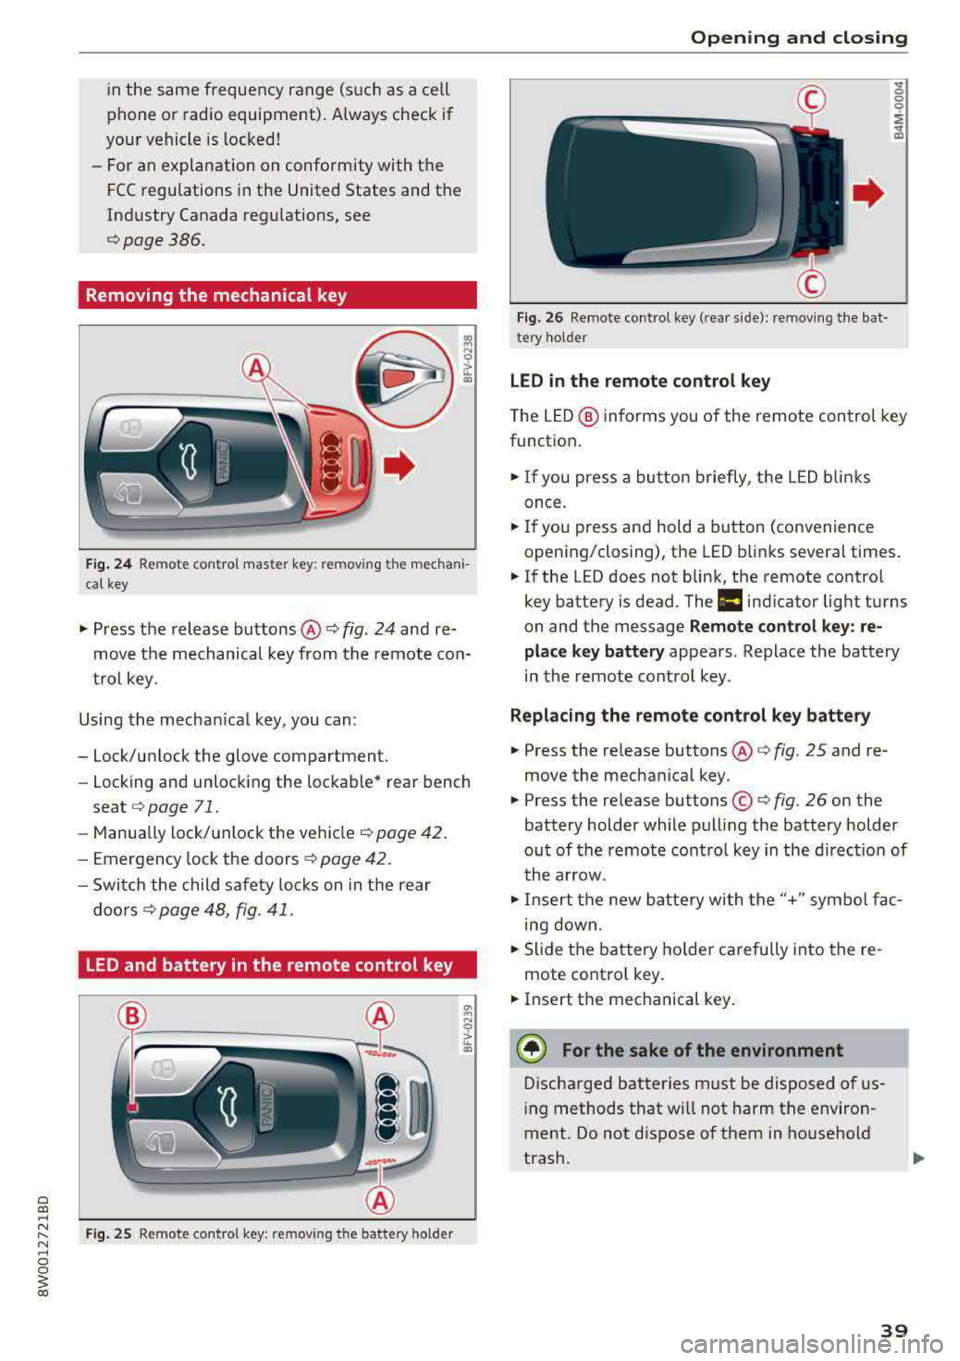 AUDI A4 2018  Owners Manual in the  same  frequency  range  (s uch  as  a ce ll 
phone  or  radio  equipment) . A lways  check  if 
your  vehicle  is locked! 
- For  an  explanation  on  conformity  with  t he 
FCC  regulations 